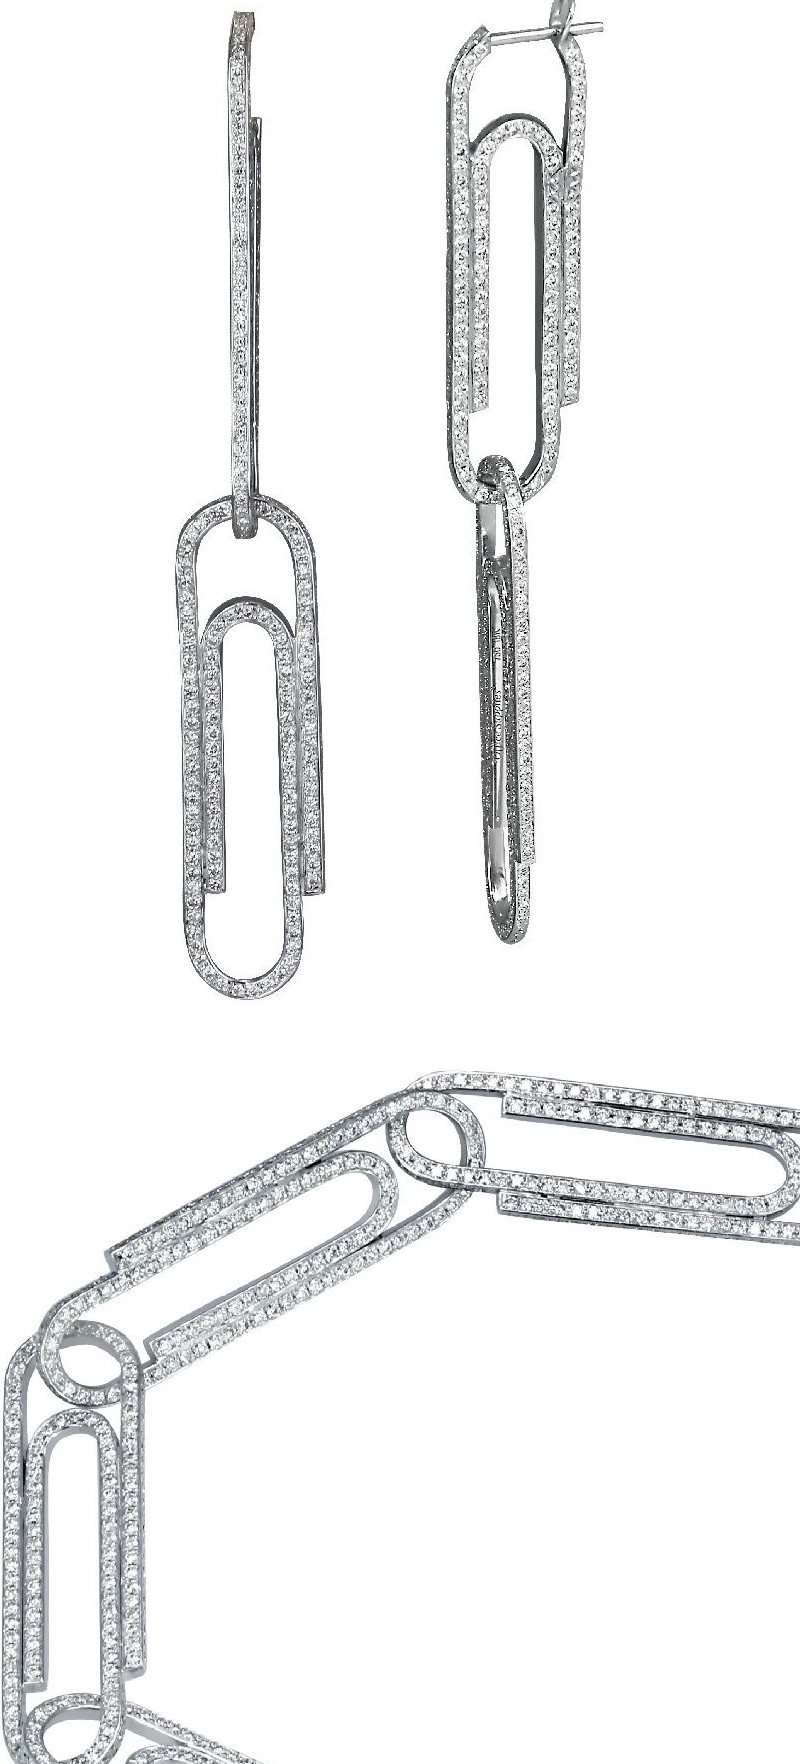 Would you buy these Virgil Abloh x Jacob & Co. luxury paper clip